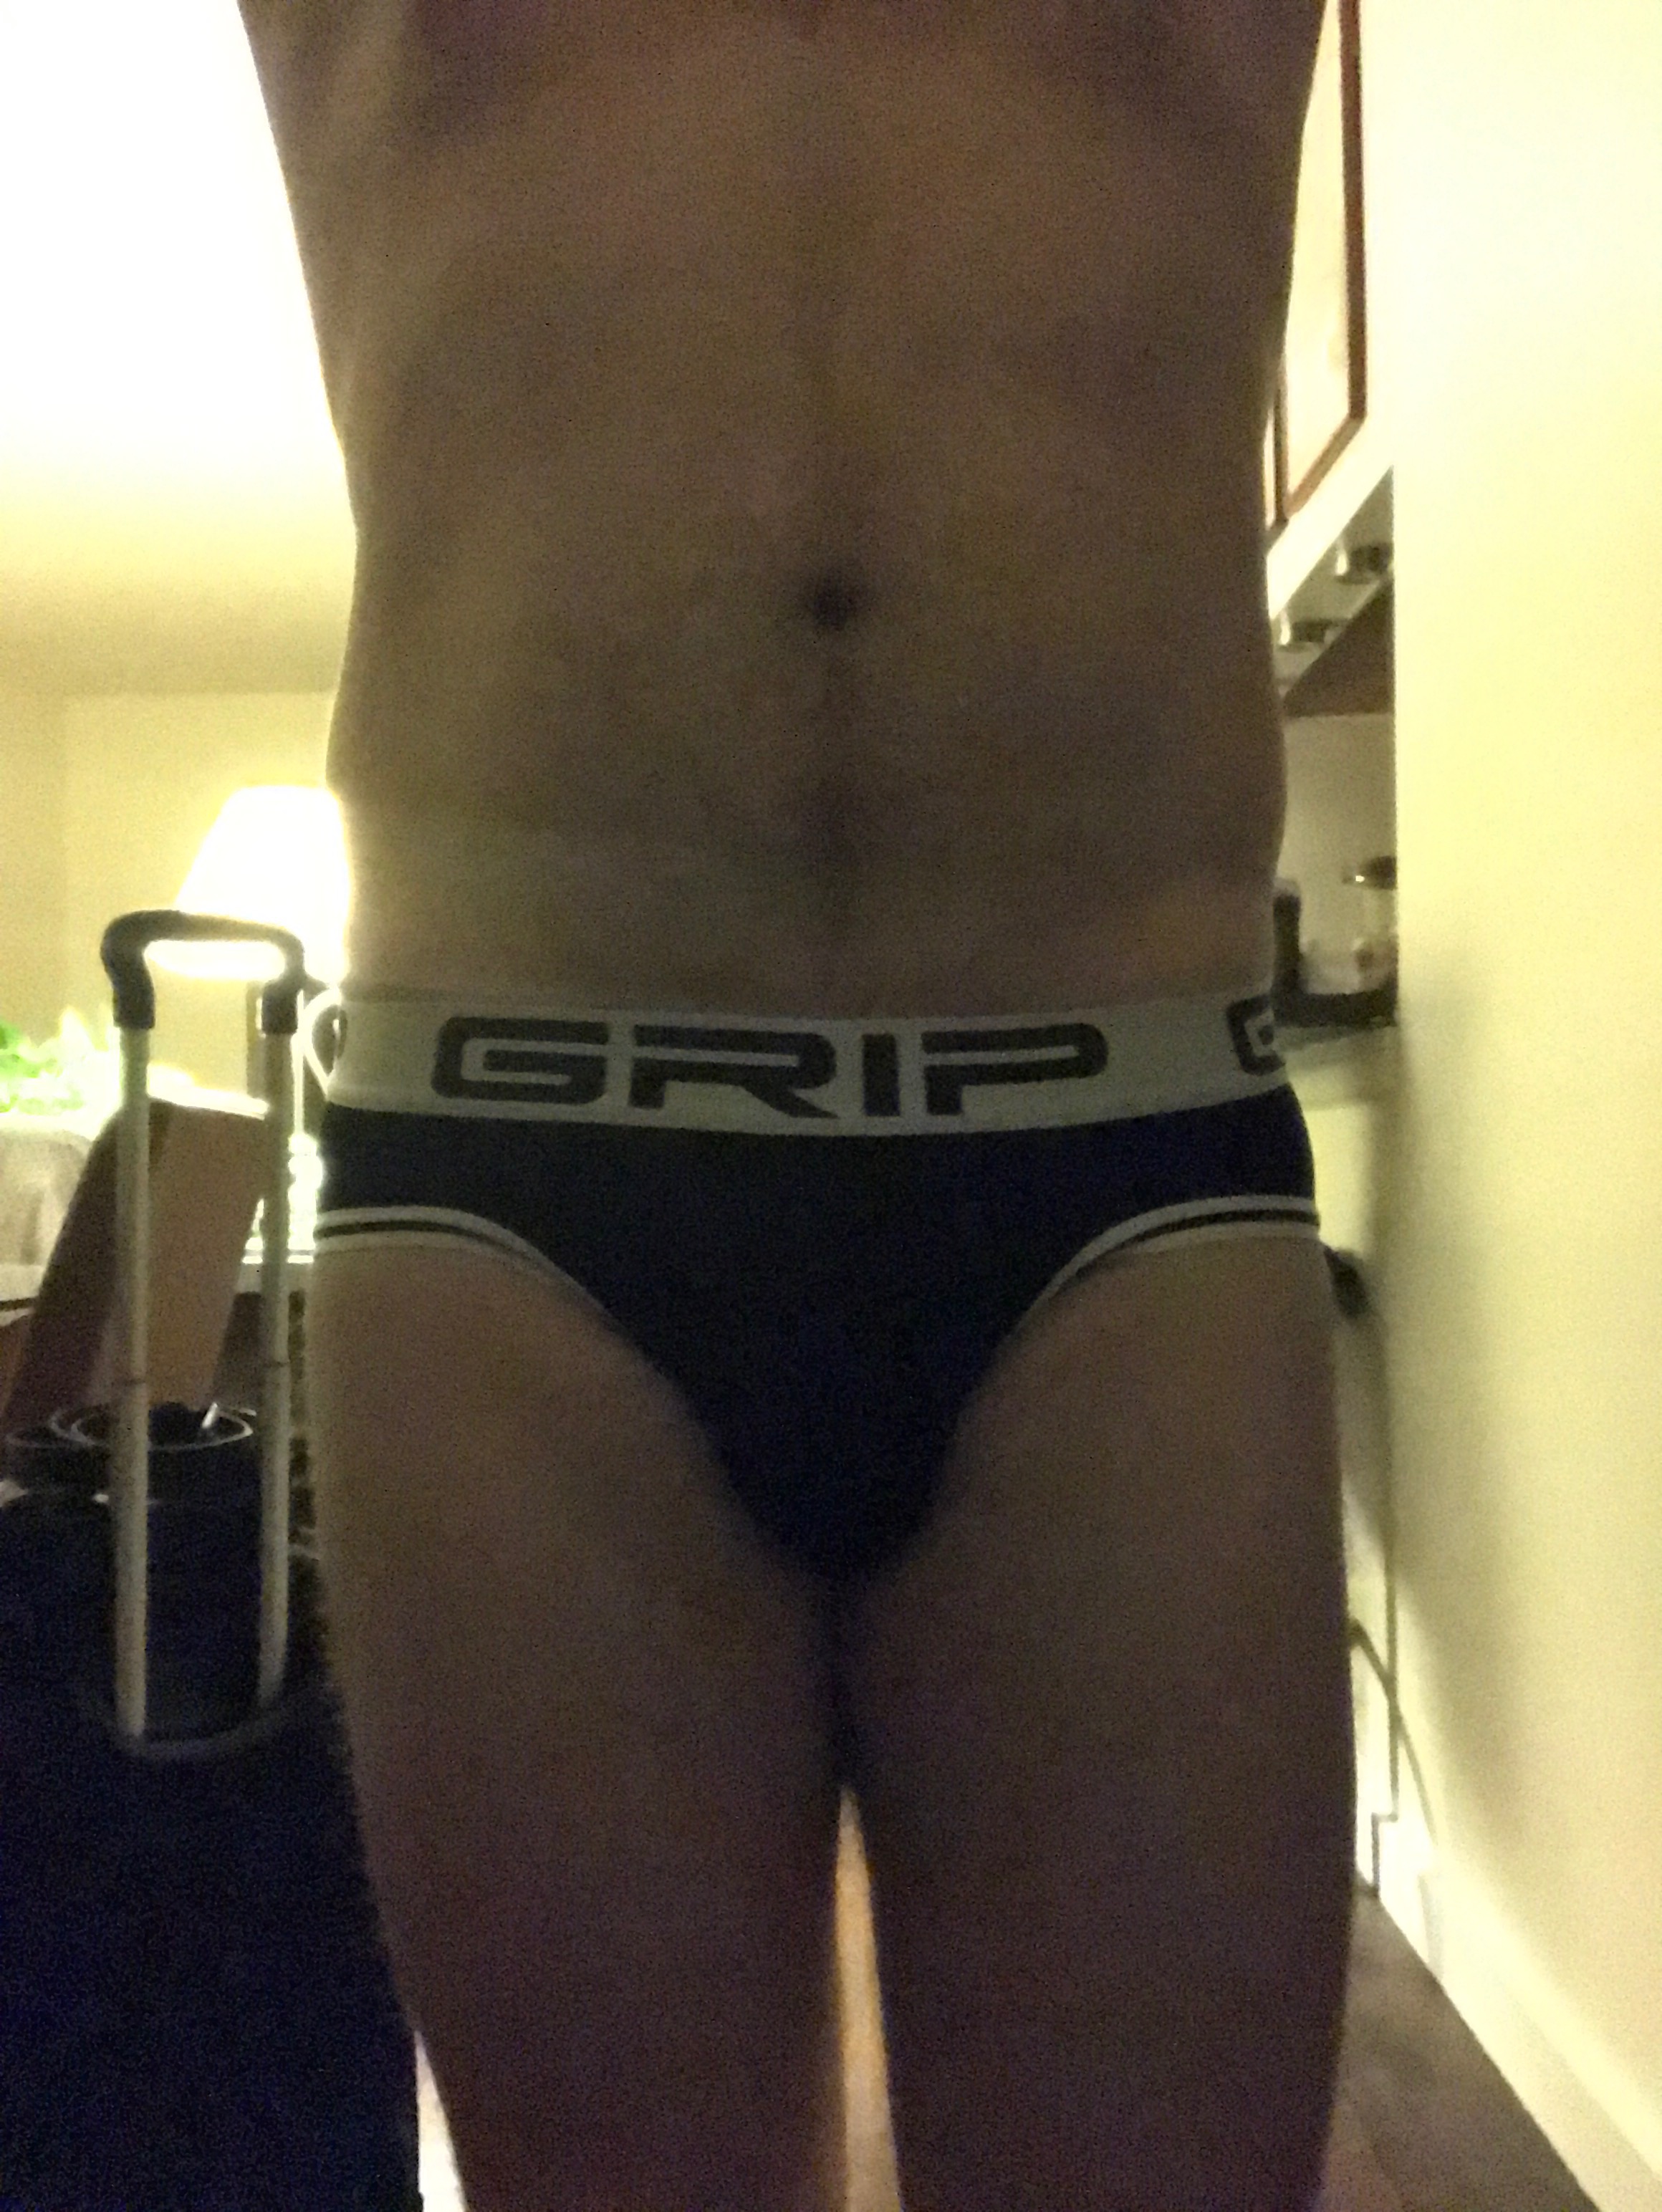 Used undies form the perfect Grip for a flight…